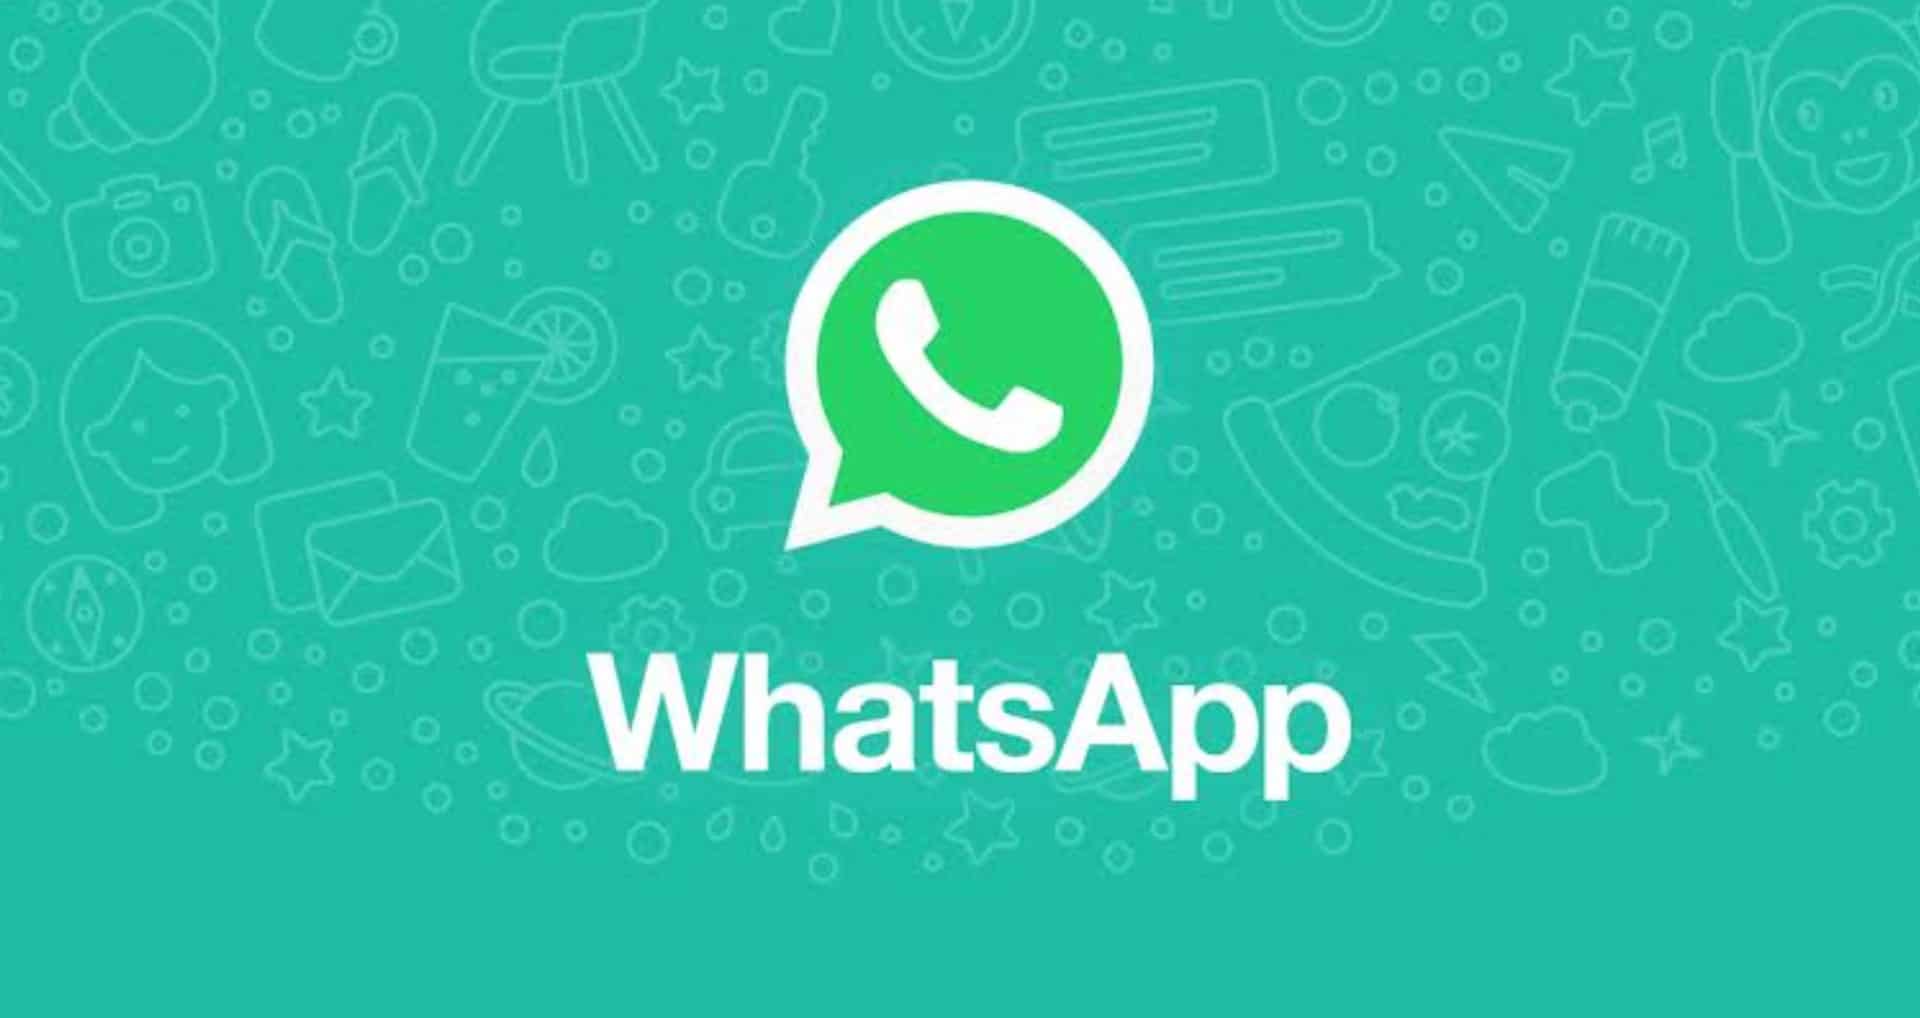 WhatsApp Beta Releases Two New Sticker Packs and Advanced Features to Configure Wallpaper